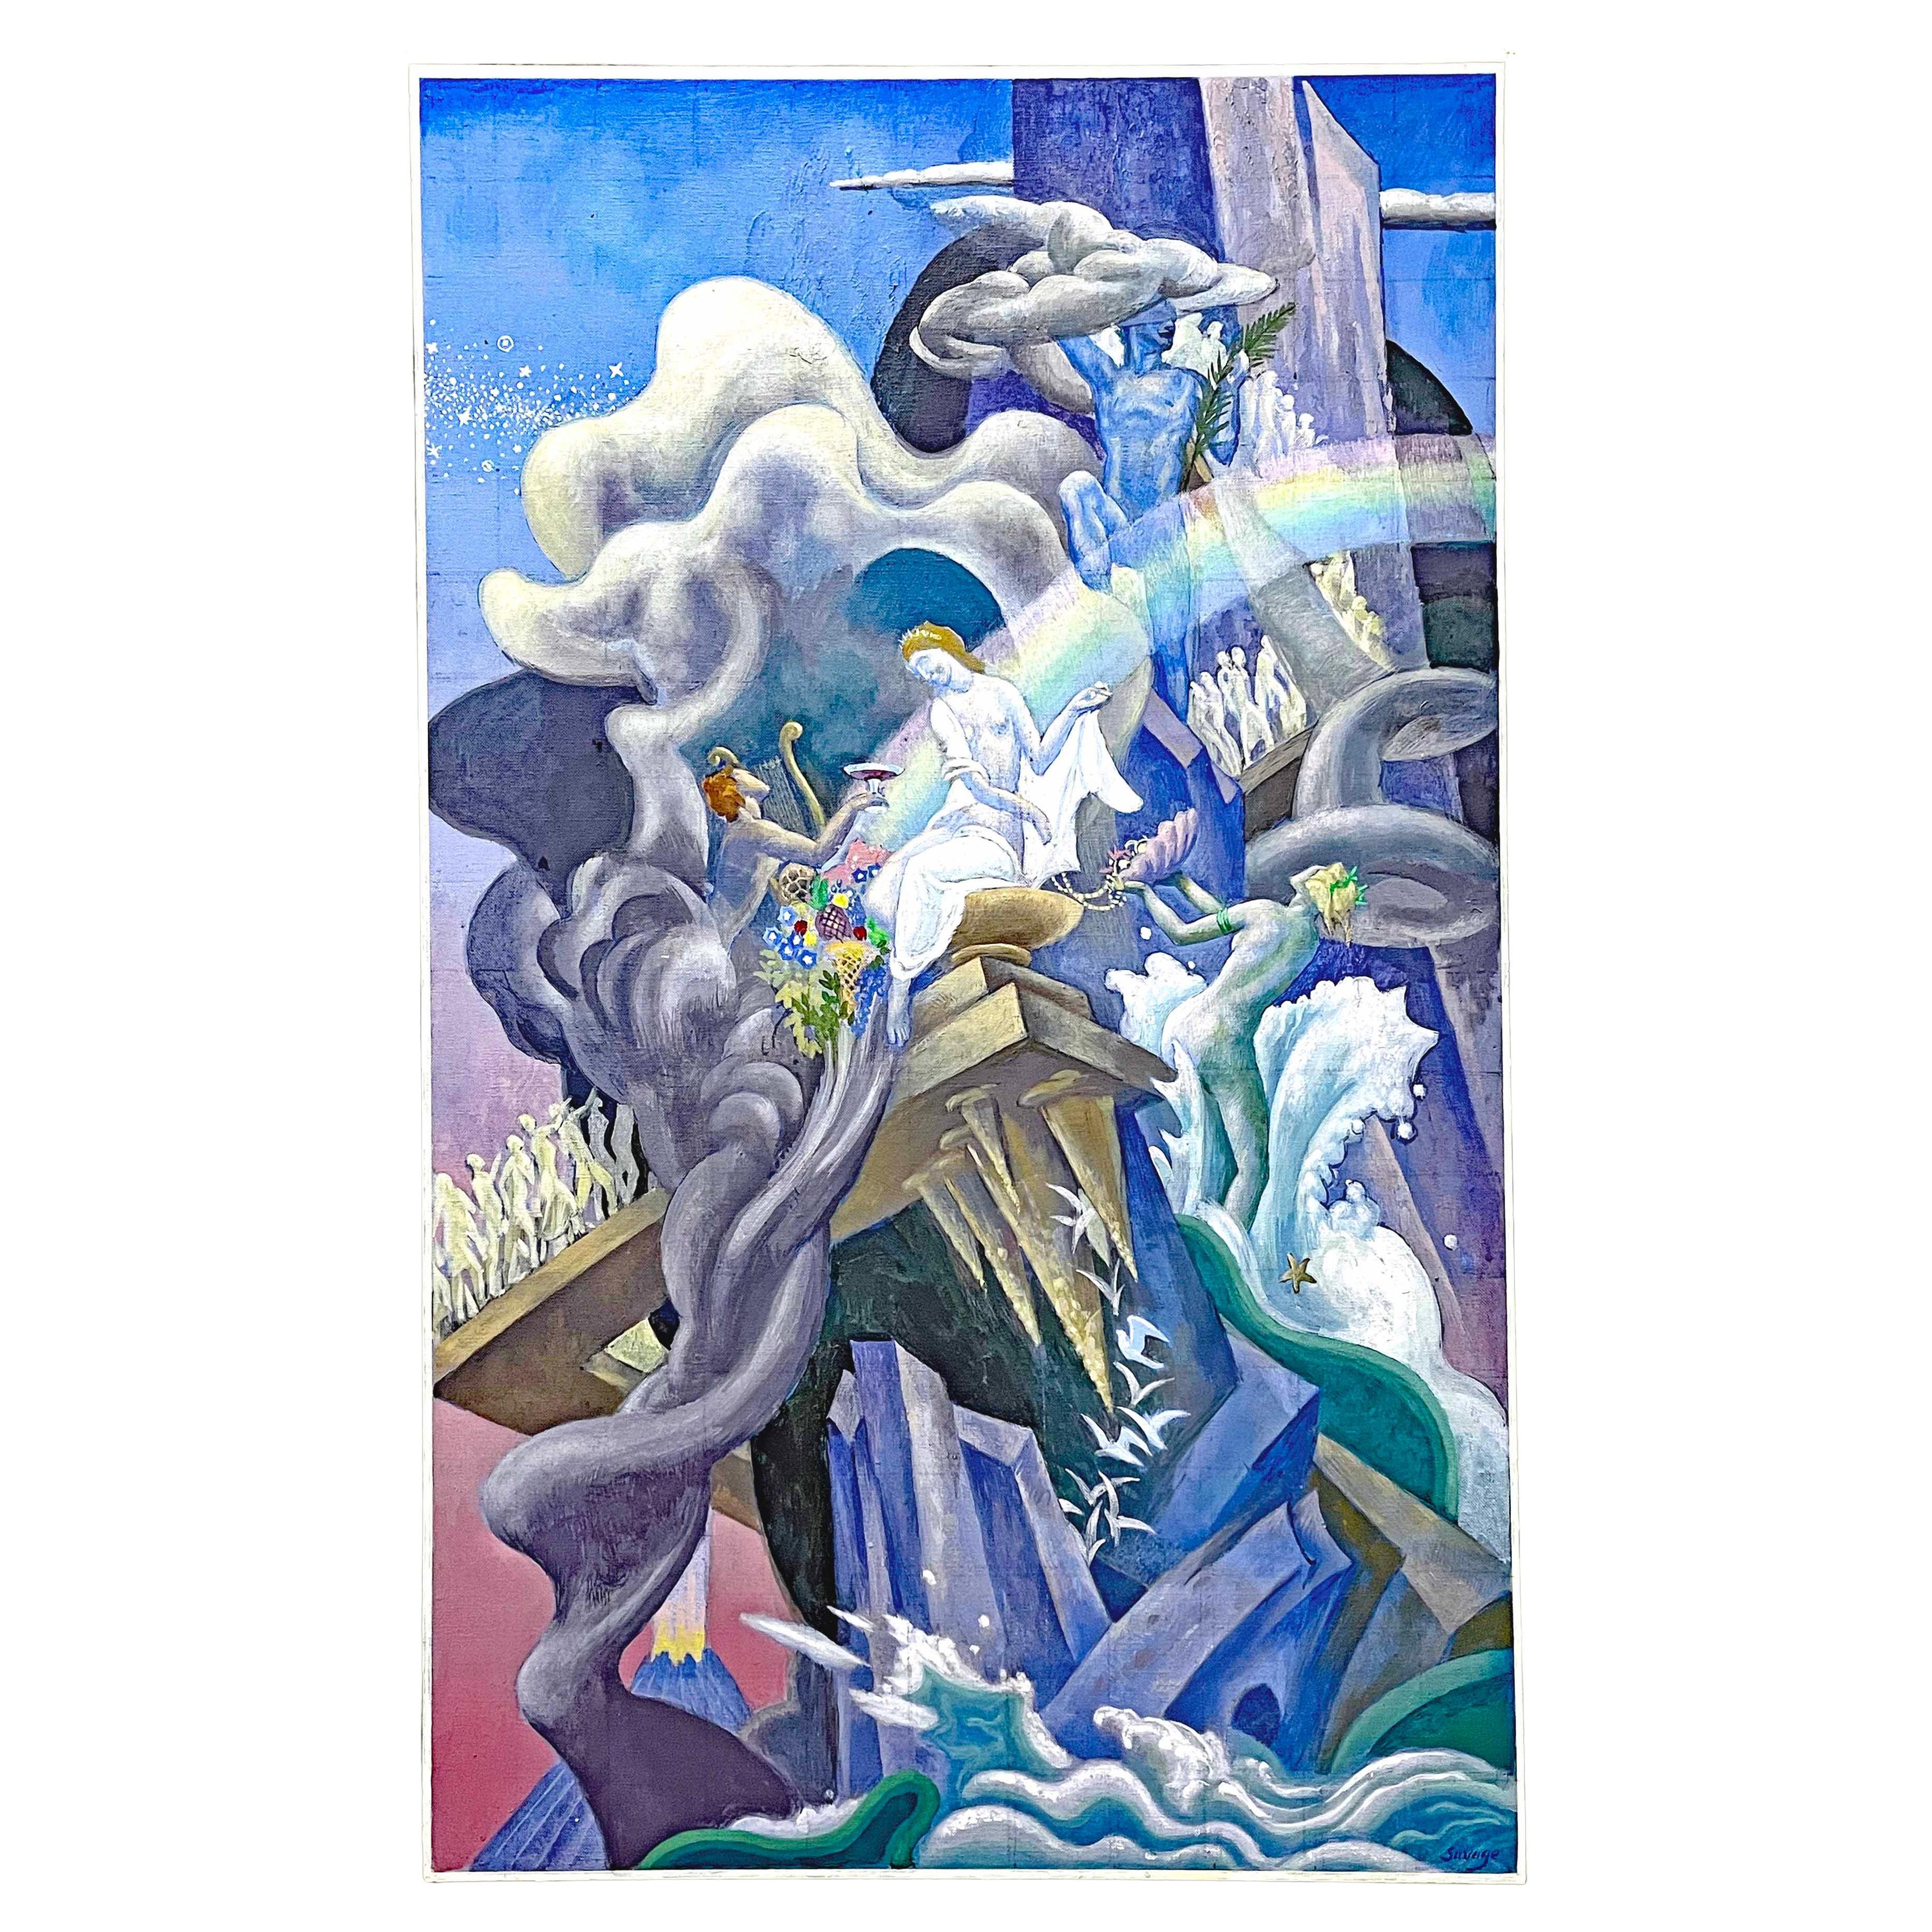 "Ninth Symphony", Art Deco Paean to Beethoven's Masterpiece by Renowned Muralist For Sale